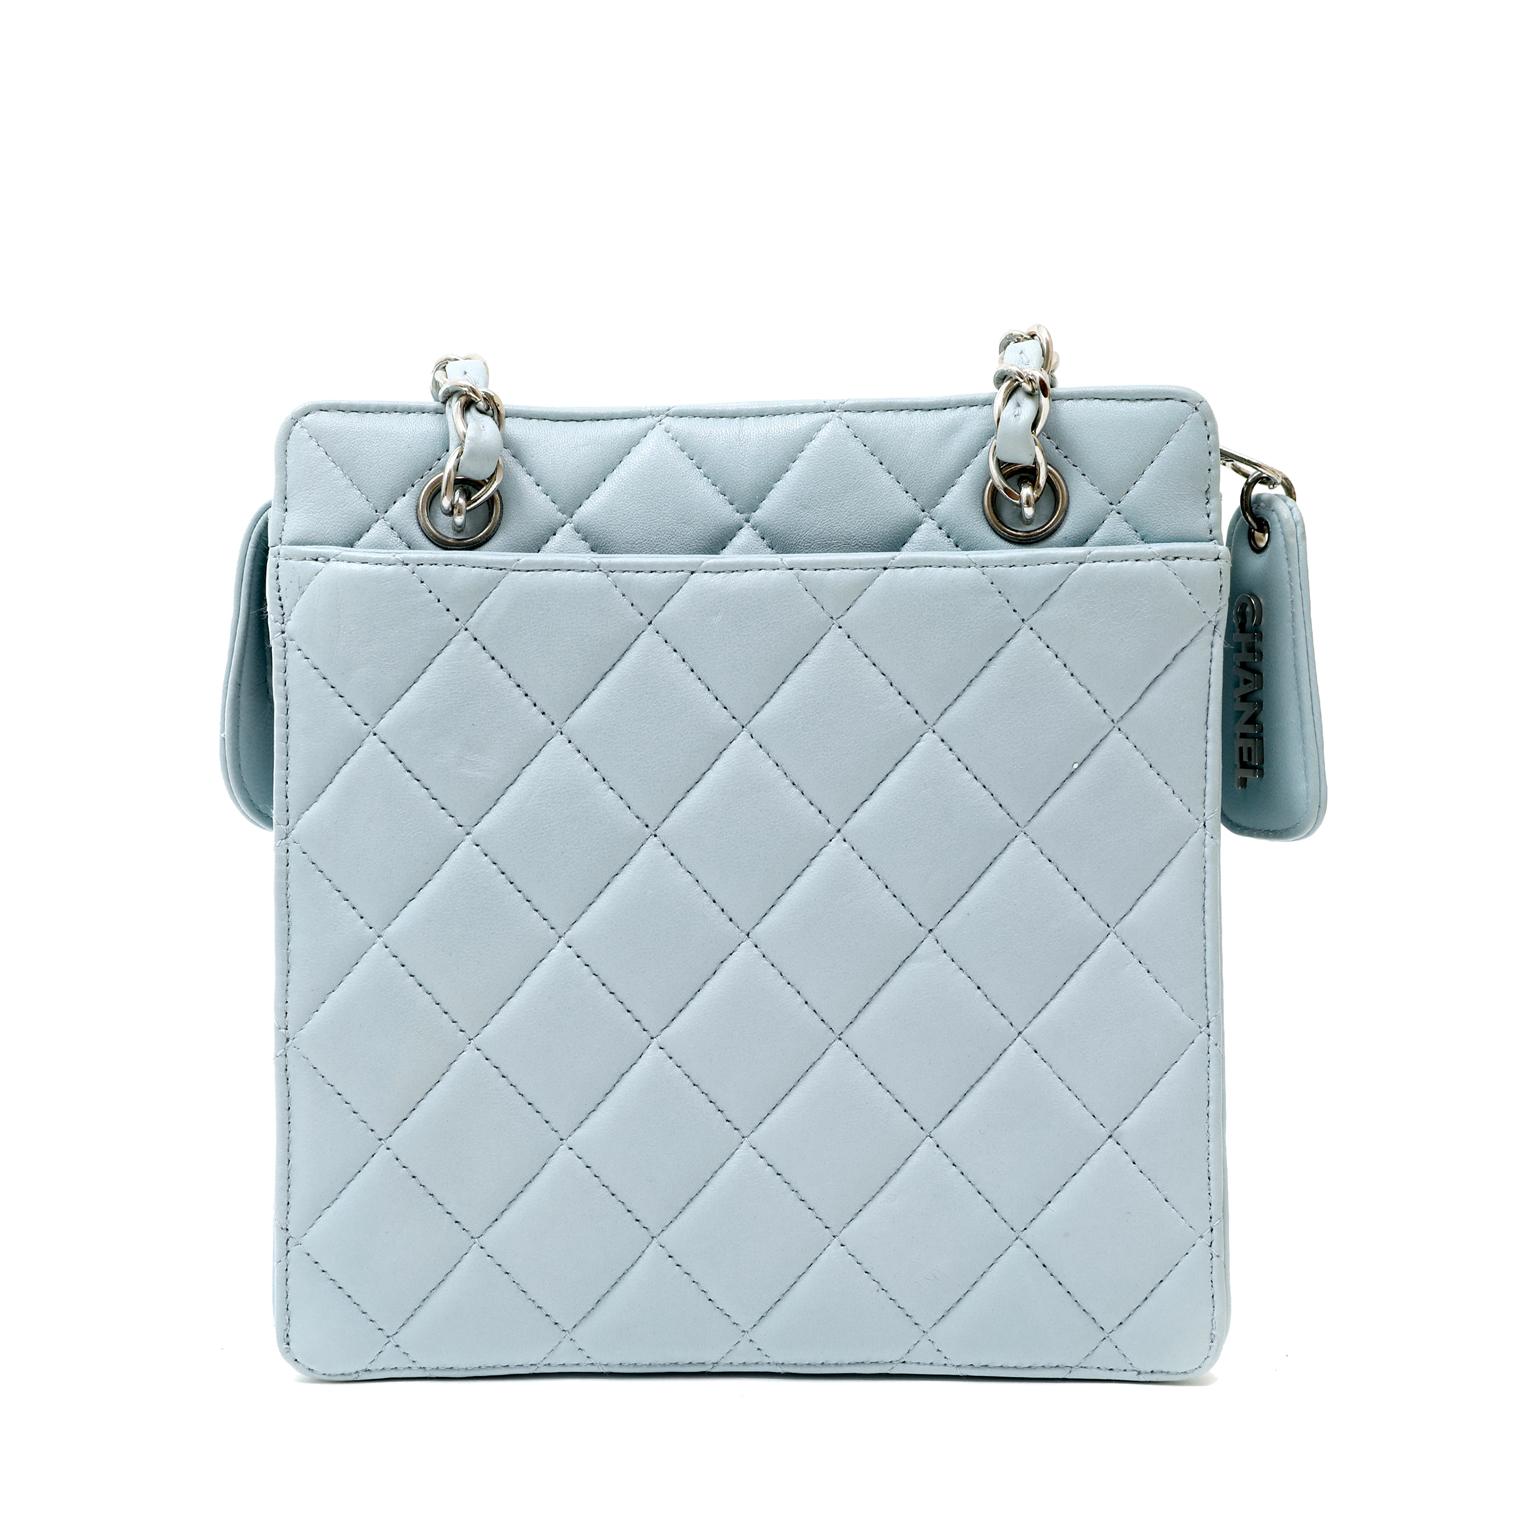 This authentic Chanel Powder Blue Quilted Leather Mini Tote is in excellent vintage condition from the late 1990's.  Perfectly scaled for today's smaller silhouettes, it easily carries all the essentials.
Powder blue leather is quilted in signature